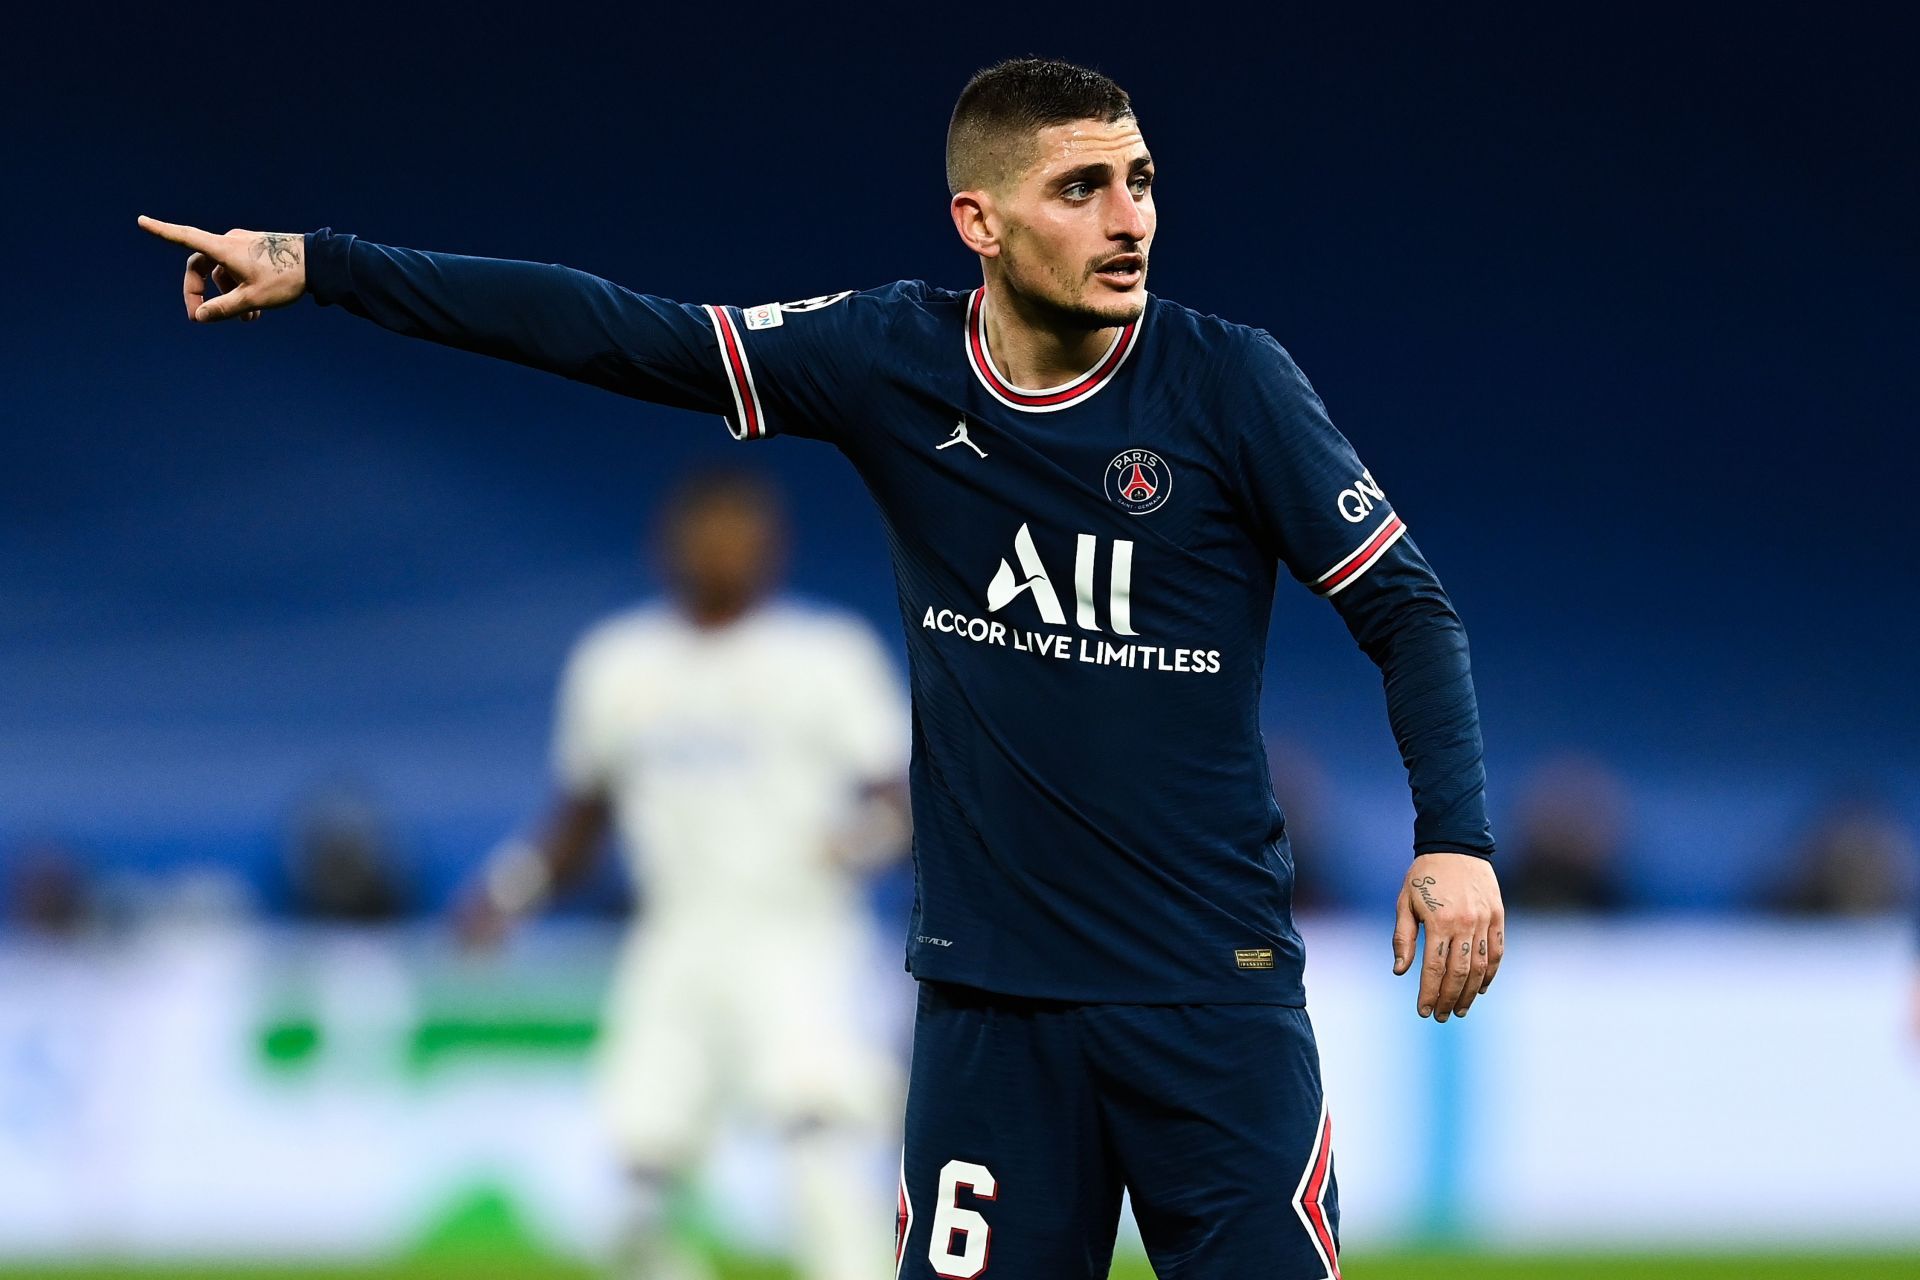 Marco Verratti has made 370 appearances for the Parisians in over a decade.